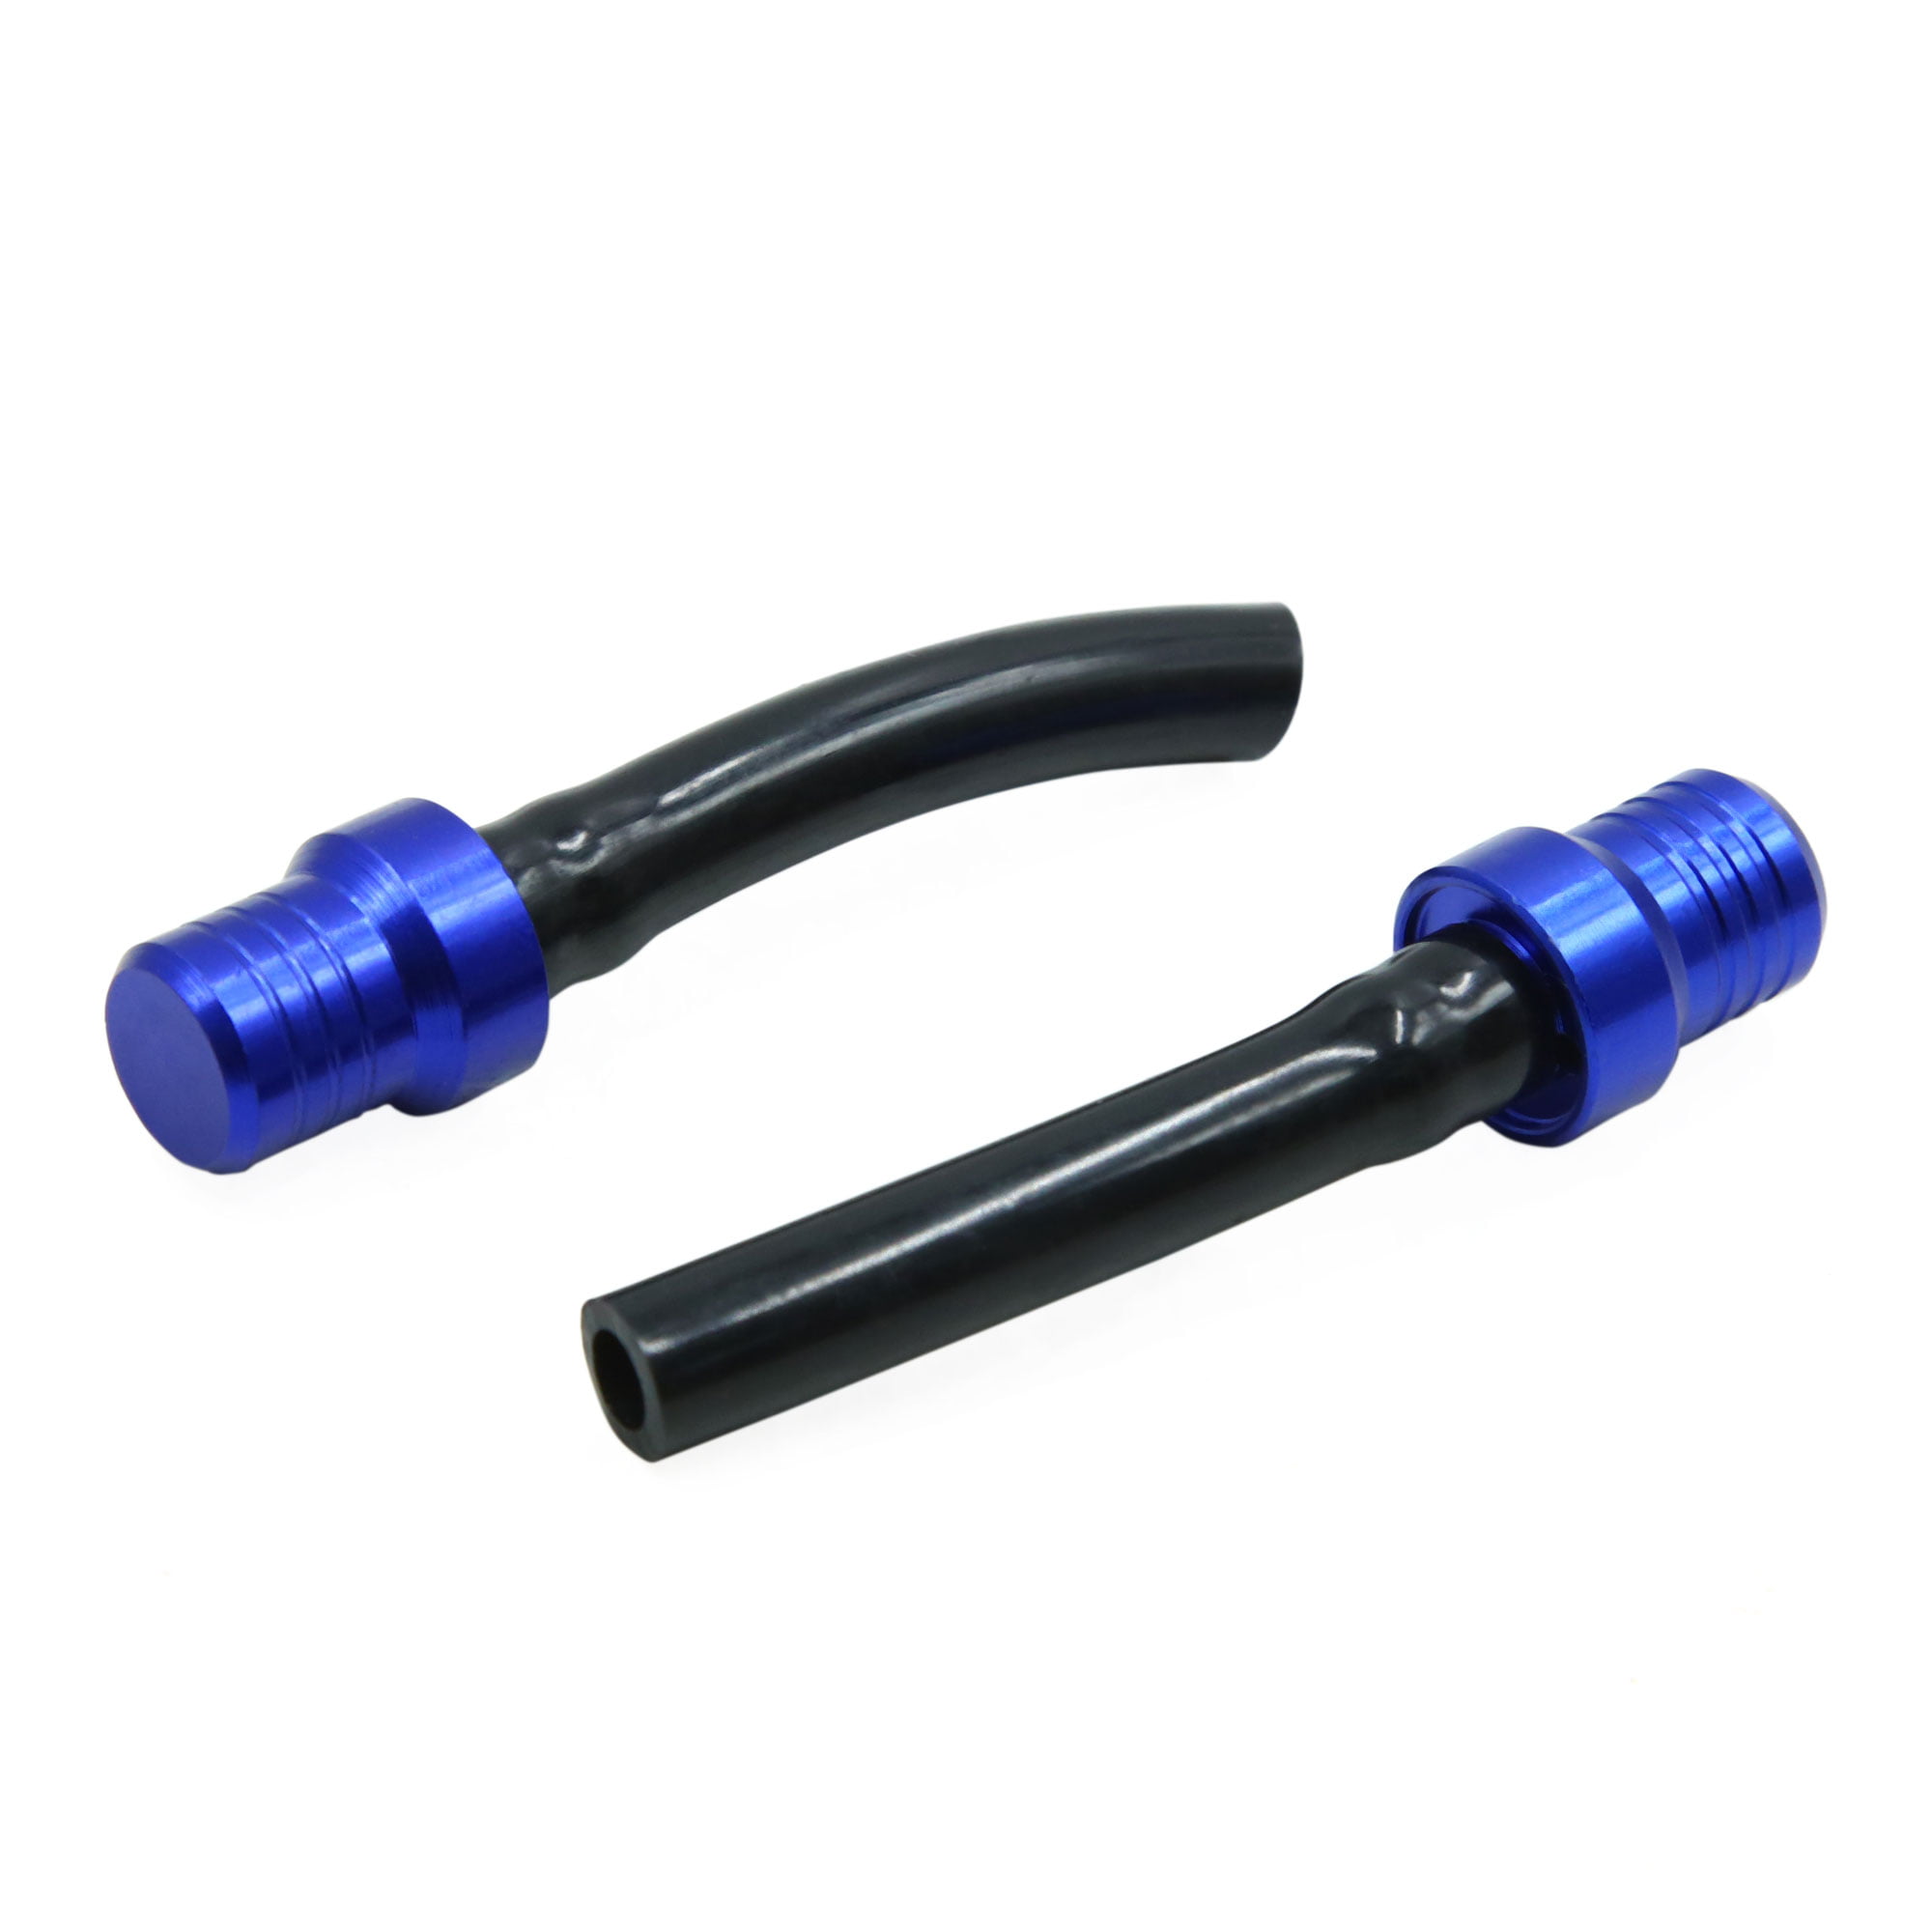 Details about   2pcs Blue Motorcycle Gas Fuel Tank Cap Valve Vent Breather Hose Pipe Two Way